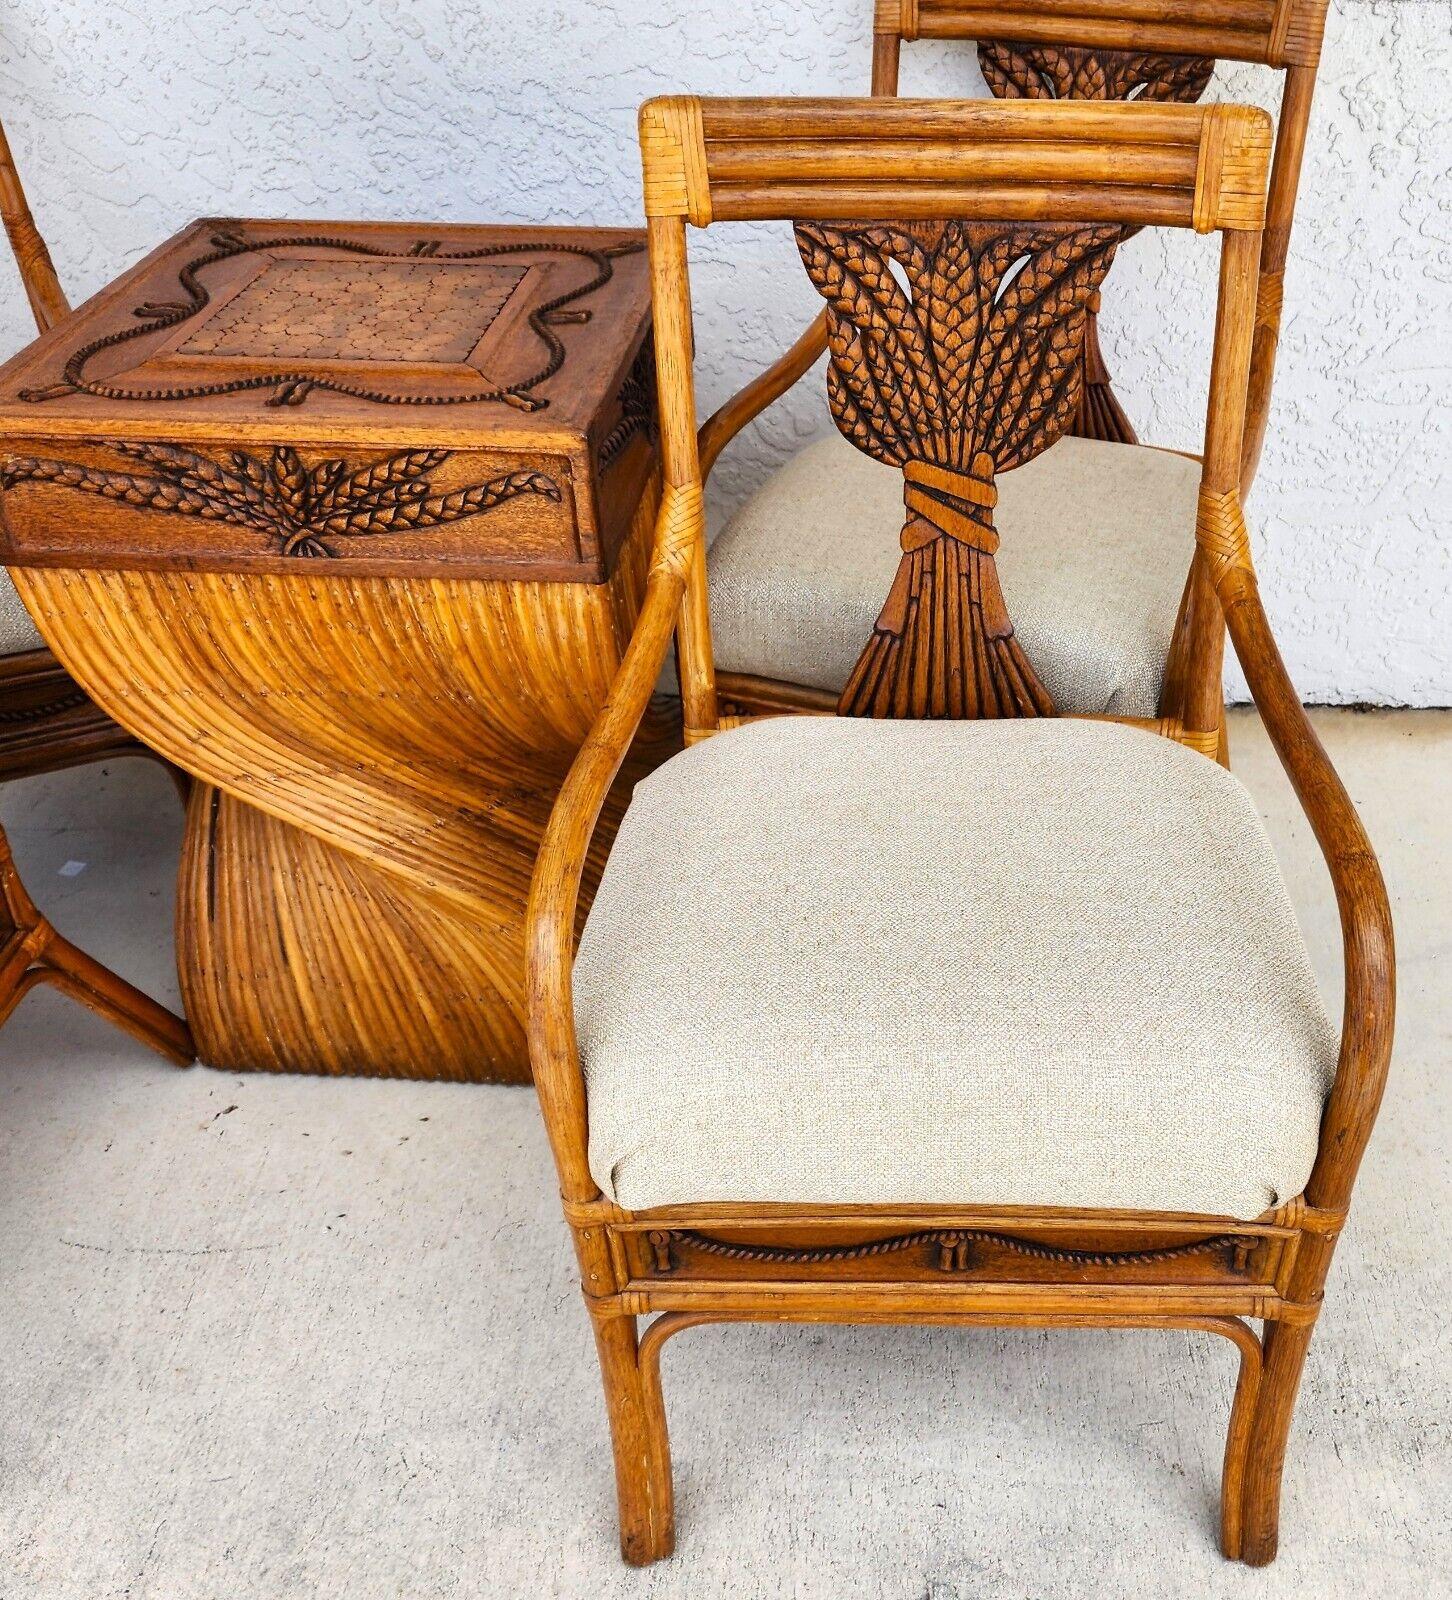 Bamboo Dining Set Rattan Wheat Back Chairs 5 Piece In Good Condition For Sale In Lake Worth, FL